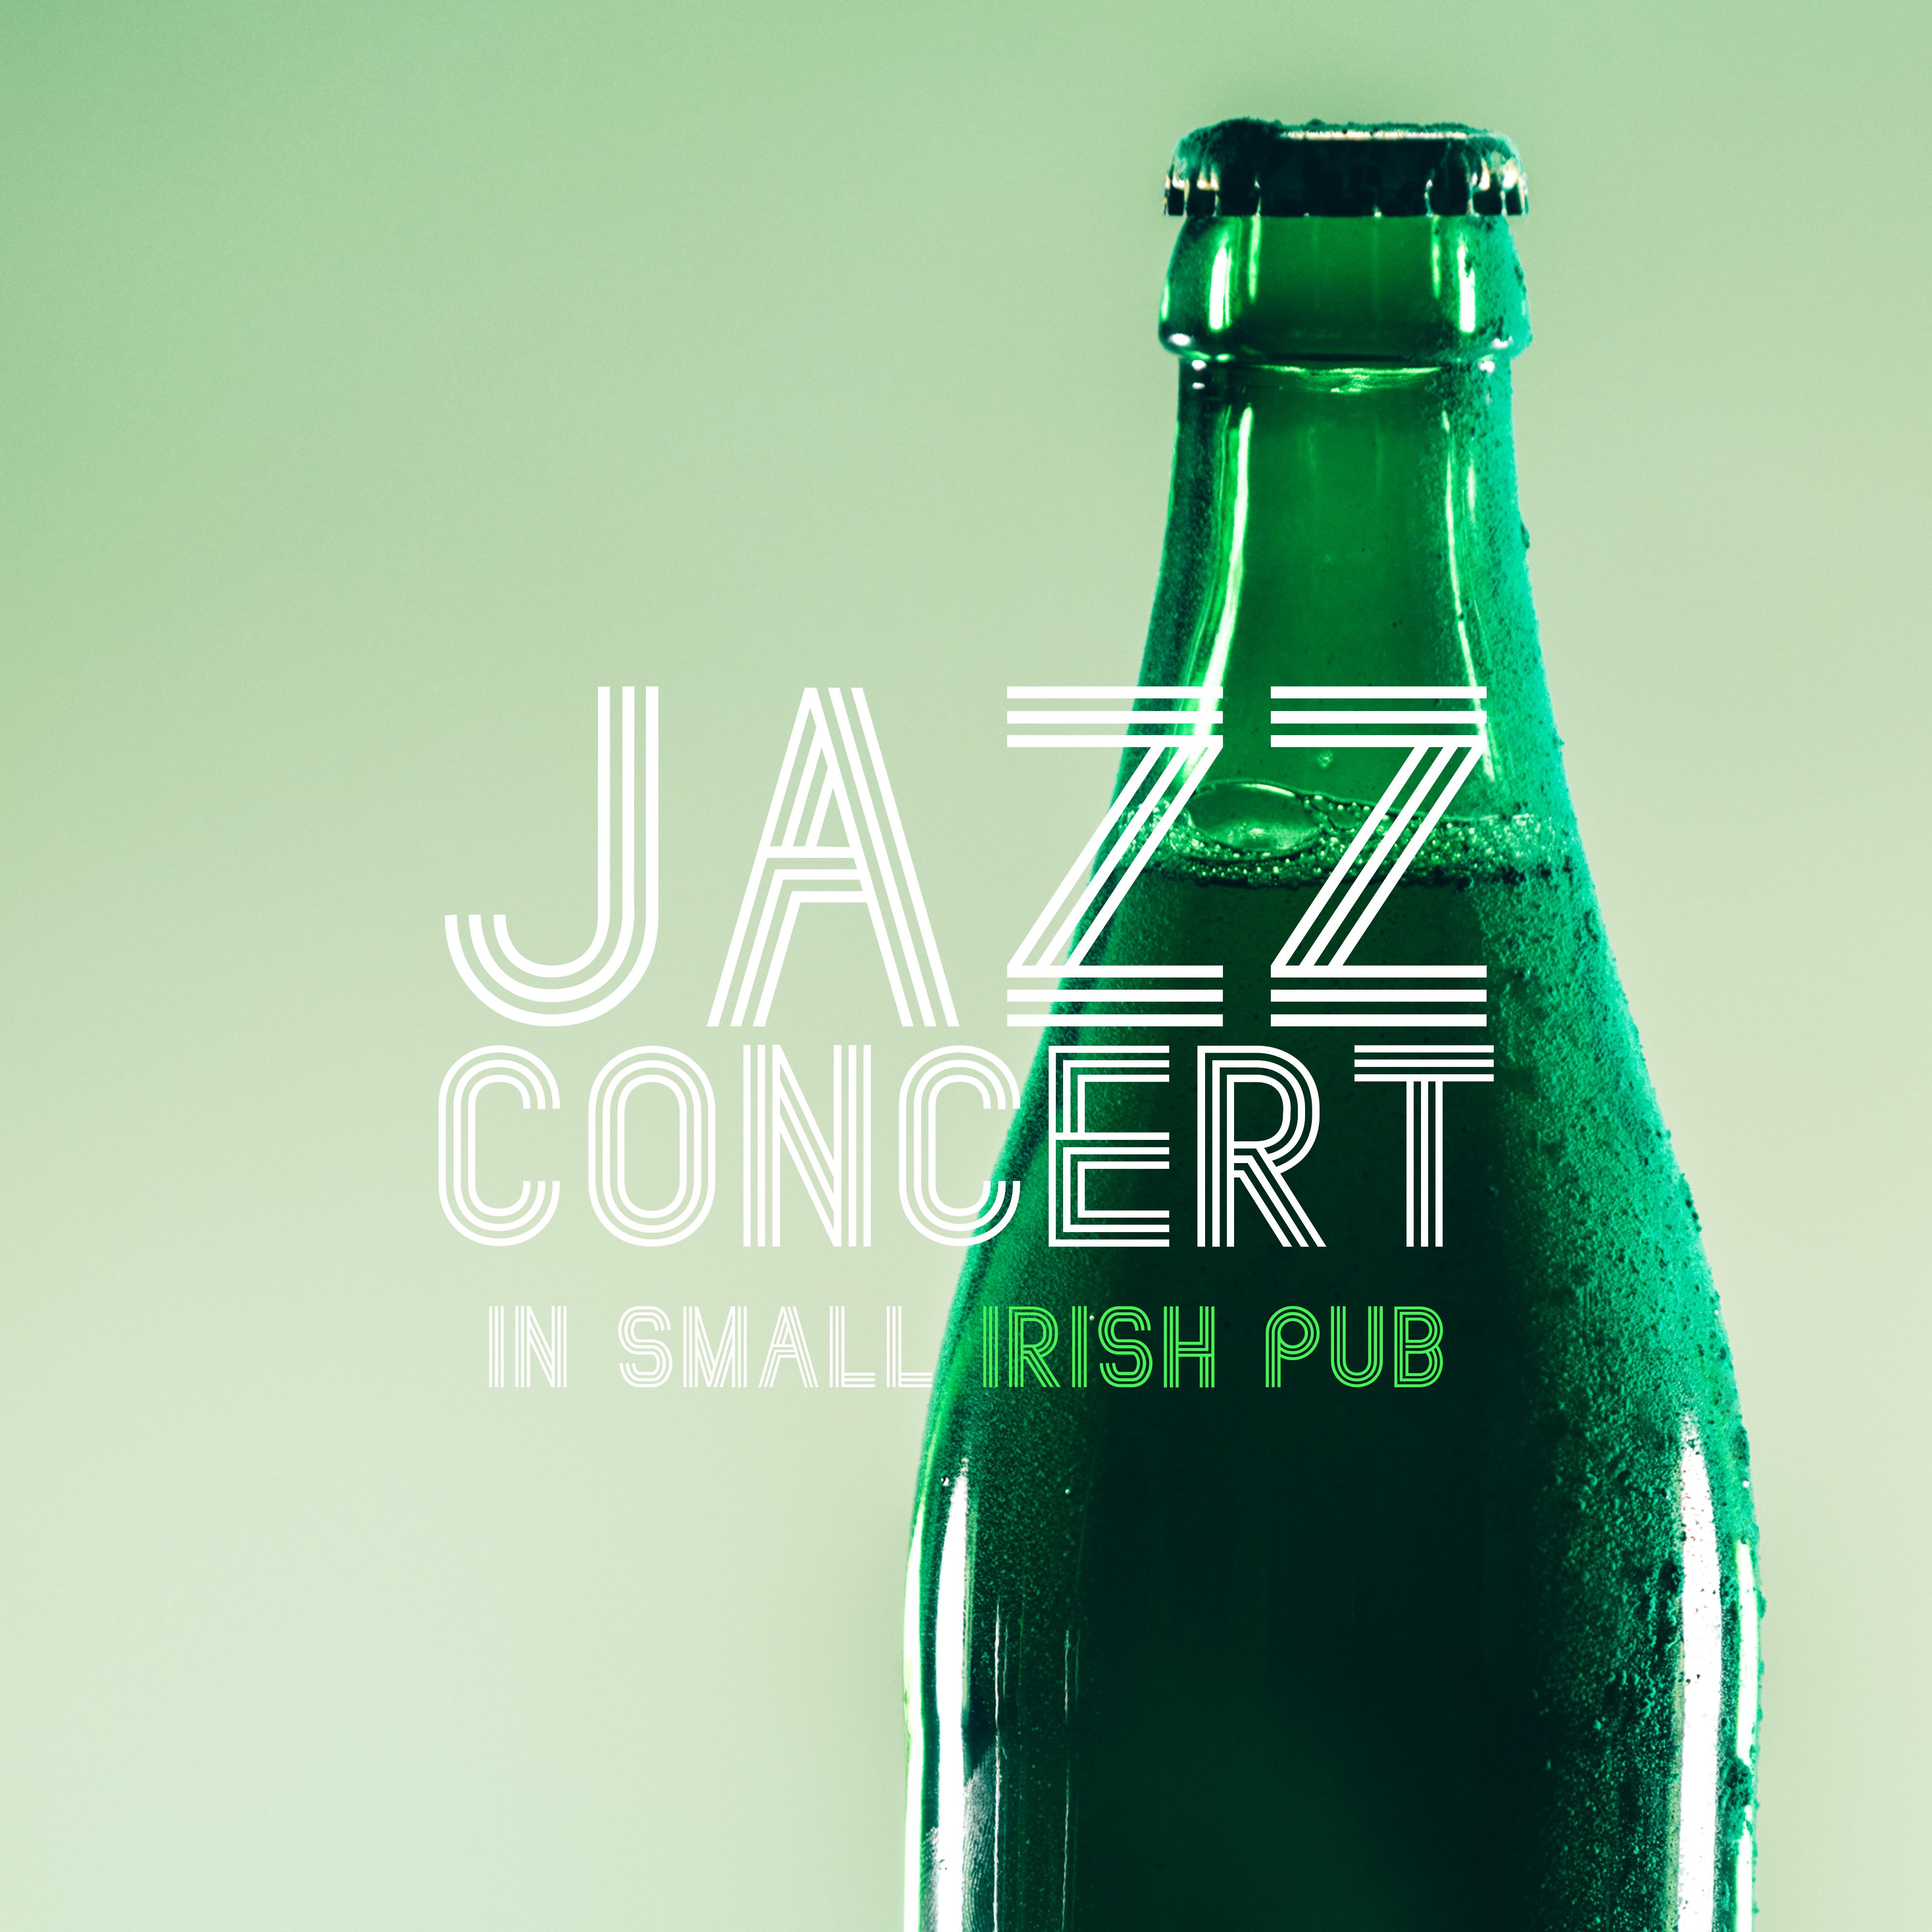 Jazz Concert in Small Irish Pub: 2019 Vintage Smooth Jazz Music Compilation for Total Relaxing, Nice Time Spending With Friends, Little Party in the Pub or Club